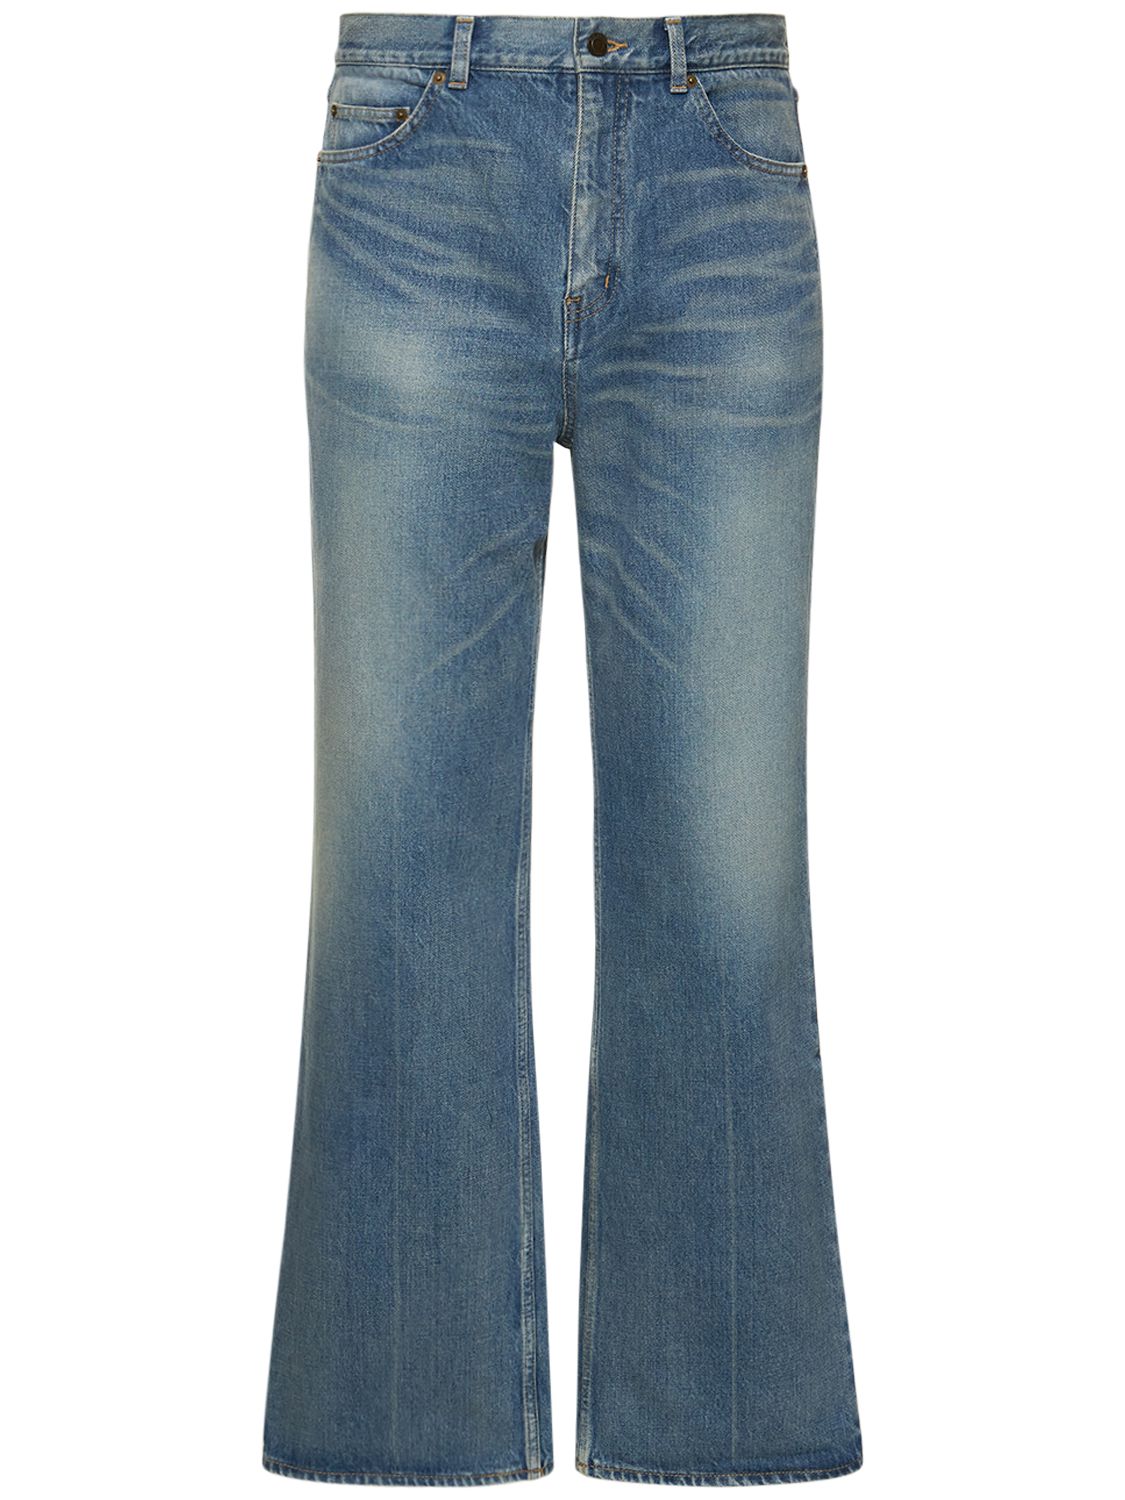 70's Flared Cotton Jeans